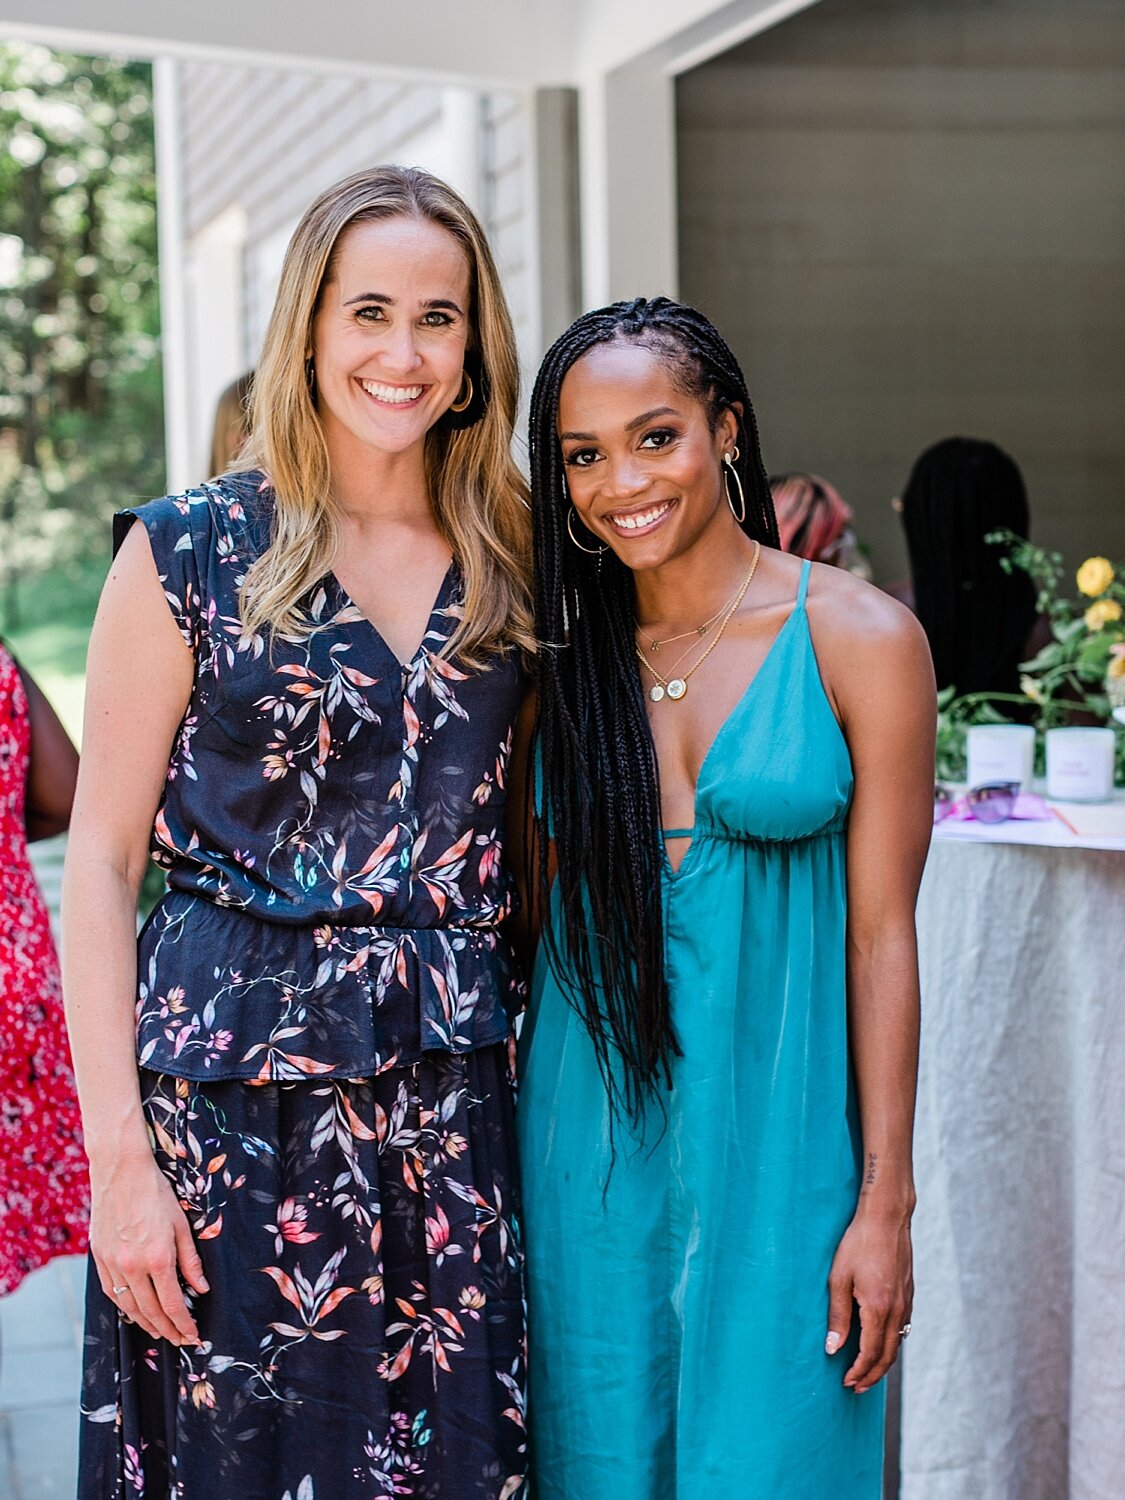 The Knot Registry House event with Bachelorette star Rachel Lindsay